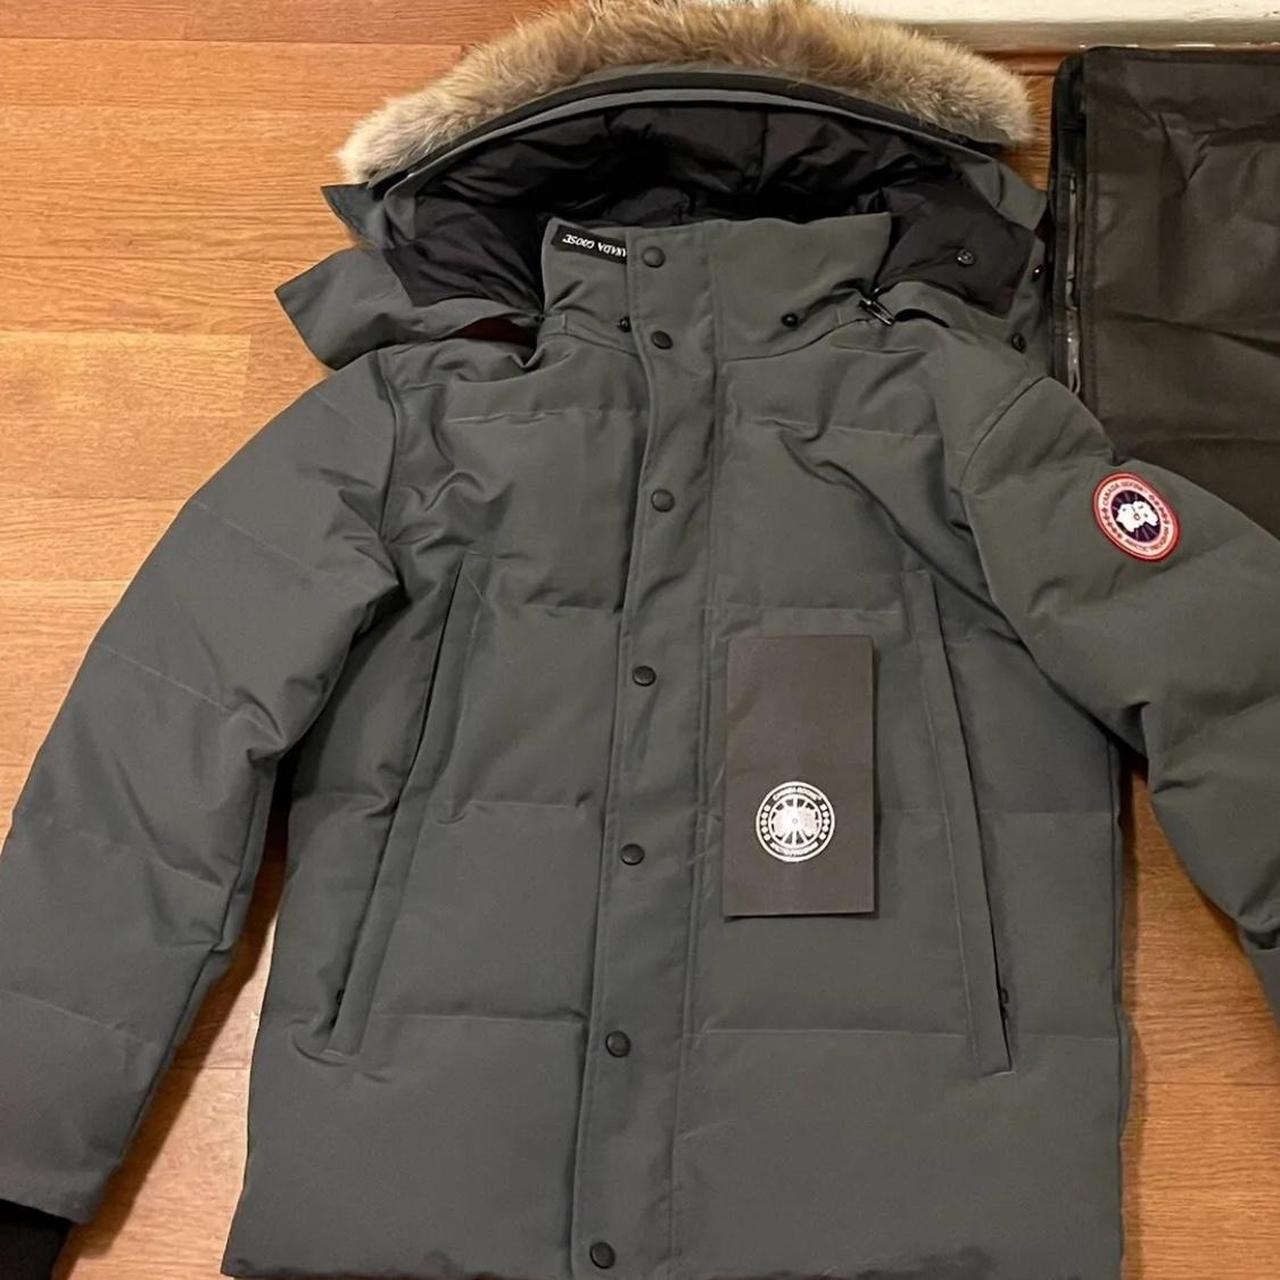 Grey Canada goose jacket size M new with tags - Depop